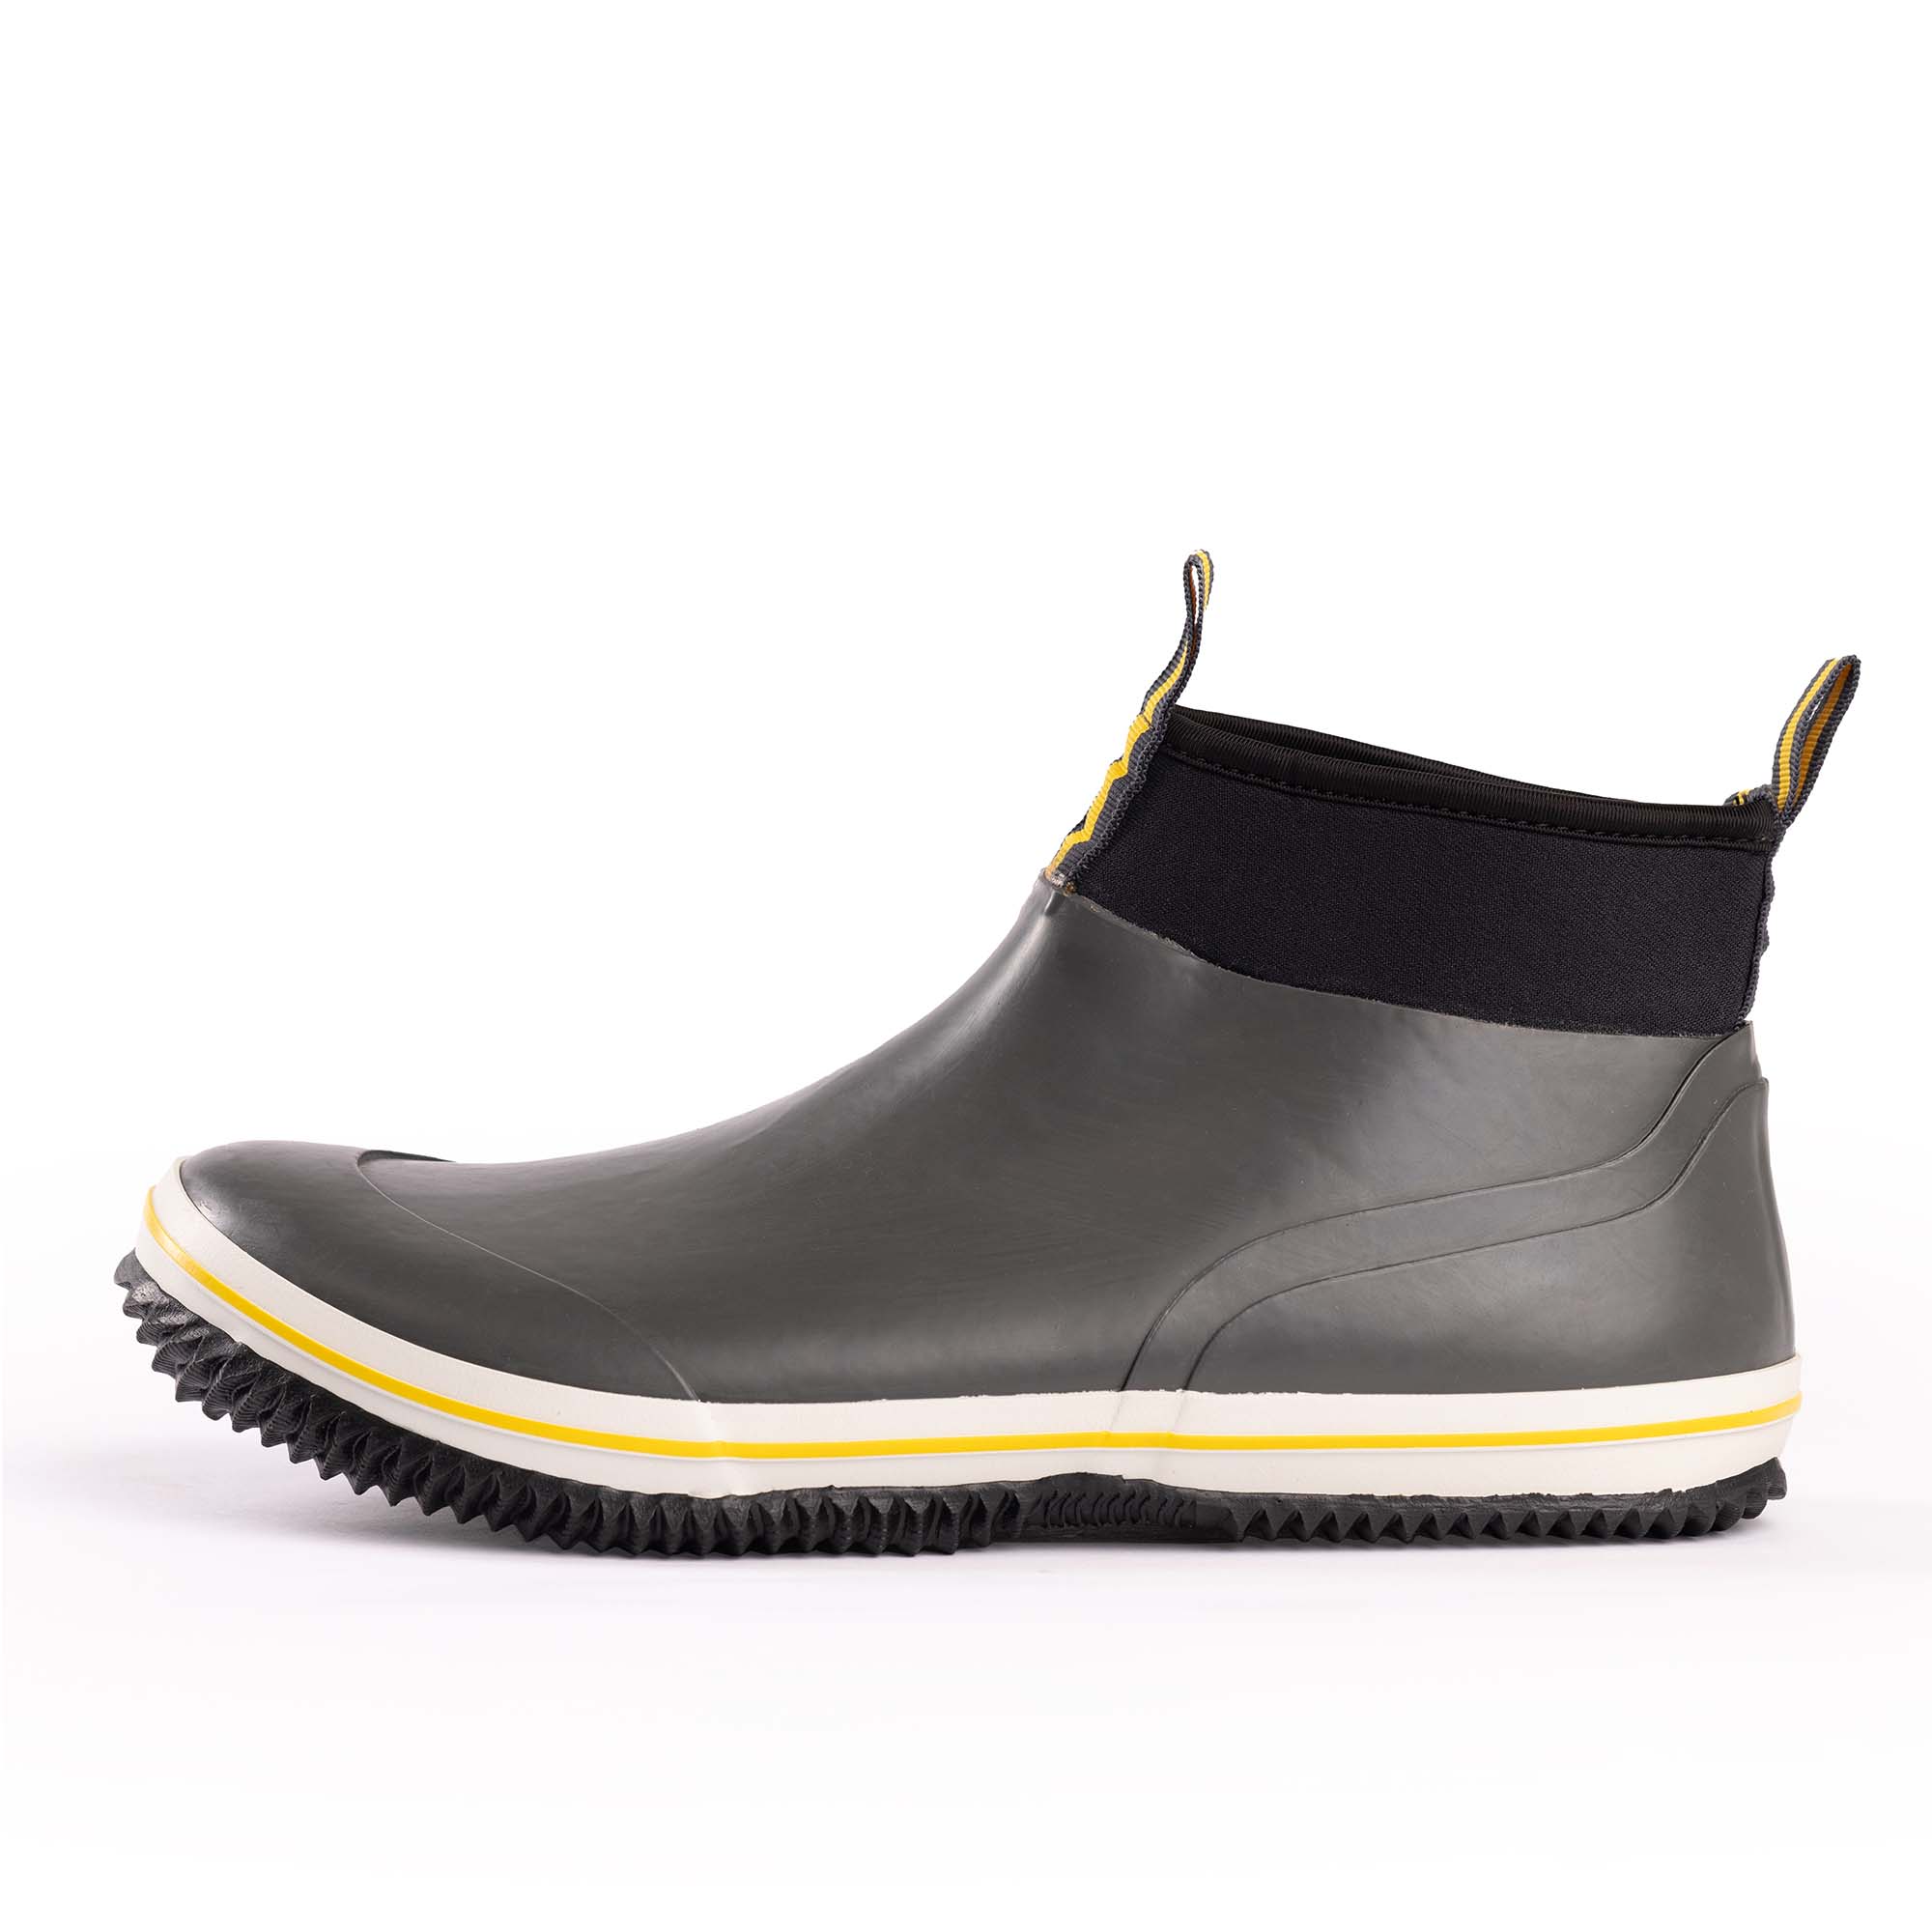 NORTY Rubber Waterproof 6 inch Ankle Rain Boot Shoes for Men